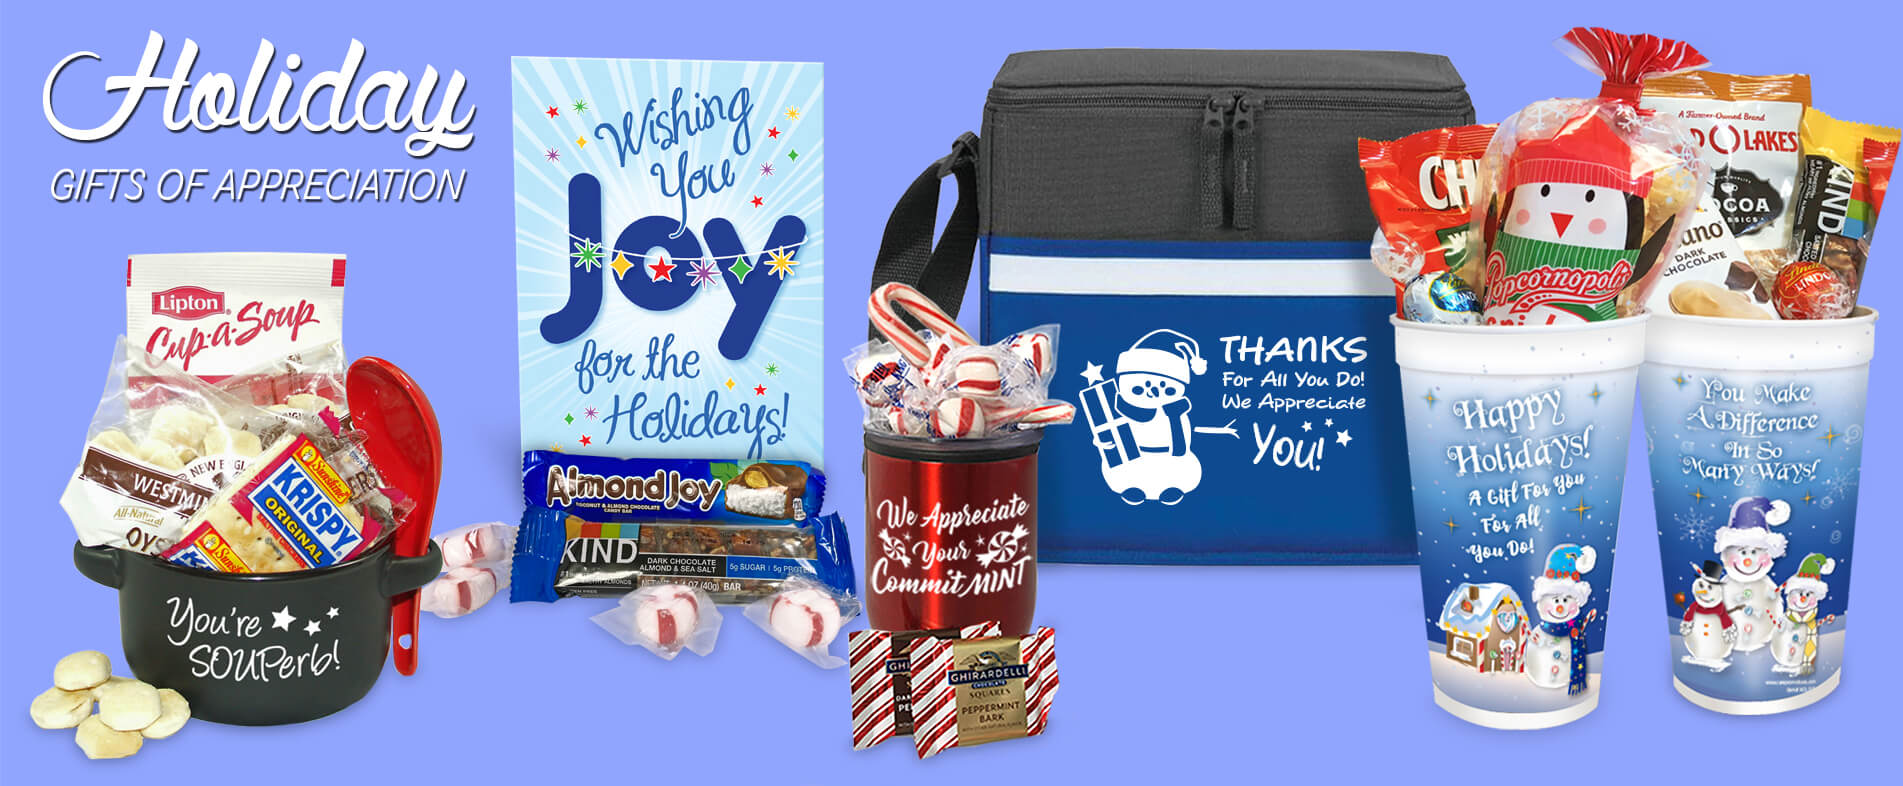 Corporate Holiday Gifts, Holiday Appreciation Gifts